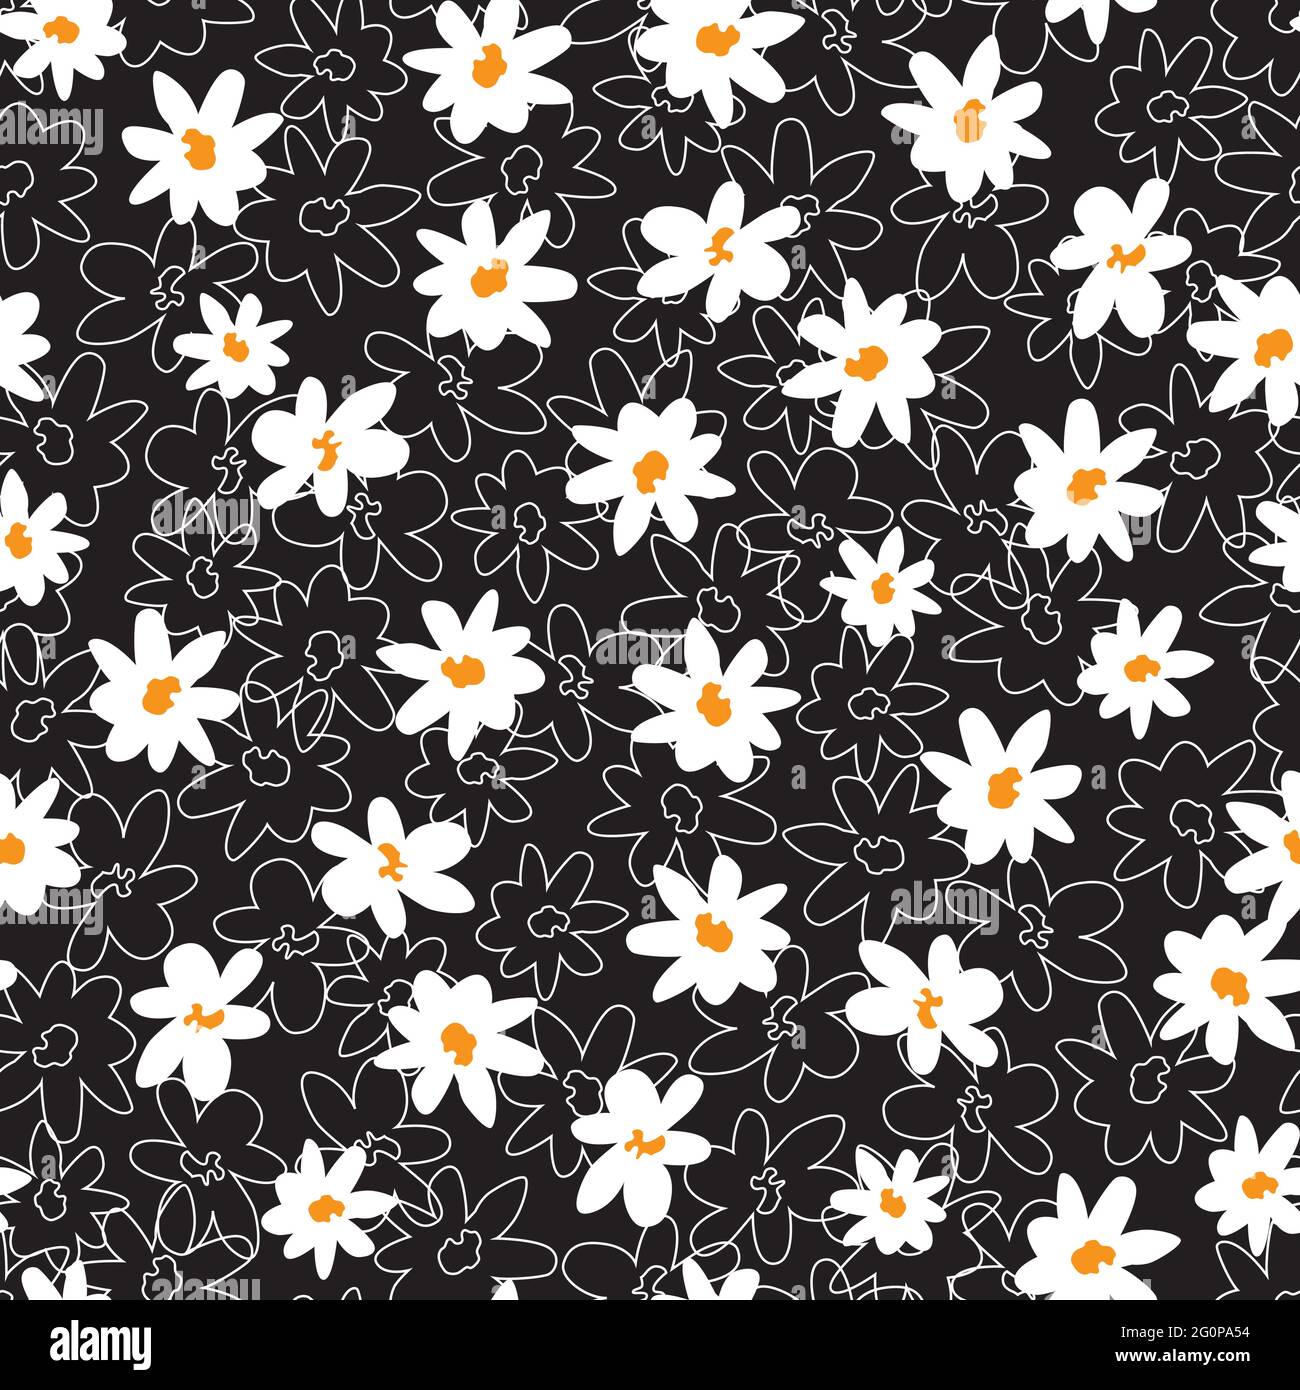 Vector black and white scattered fun daisy flowers repeat pattern with ...